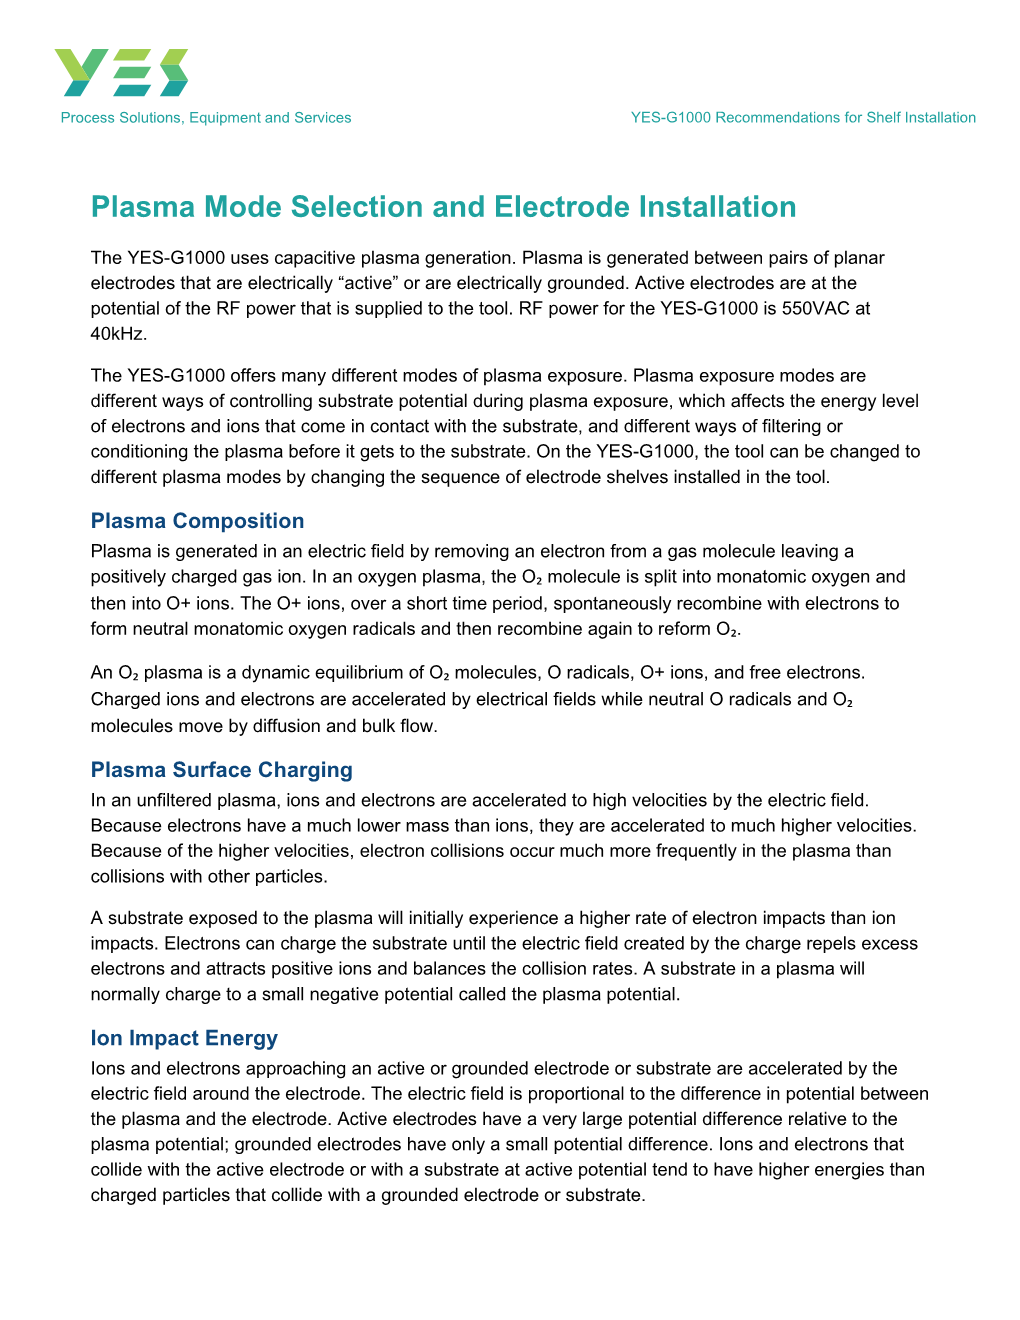 Plasma Mode Selection and Electrode Installation